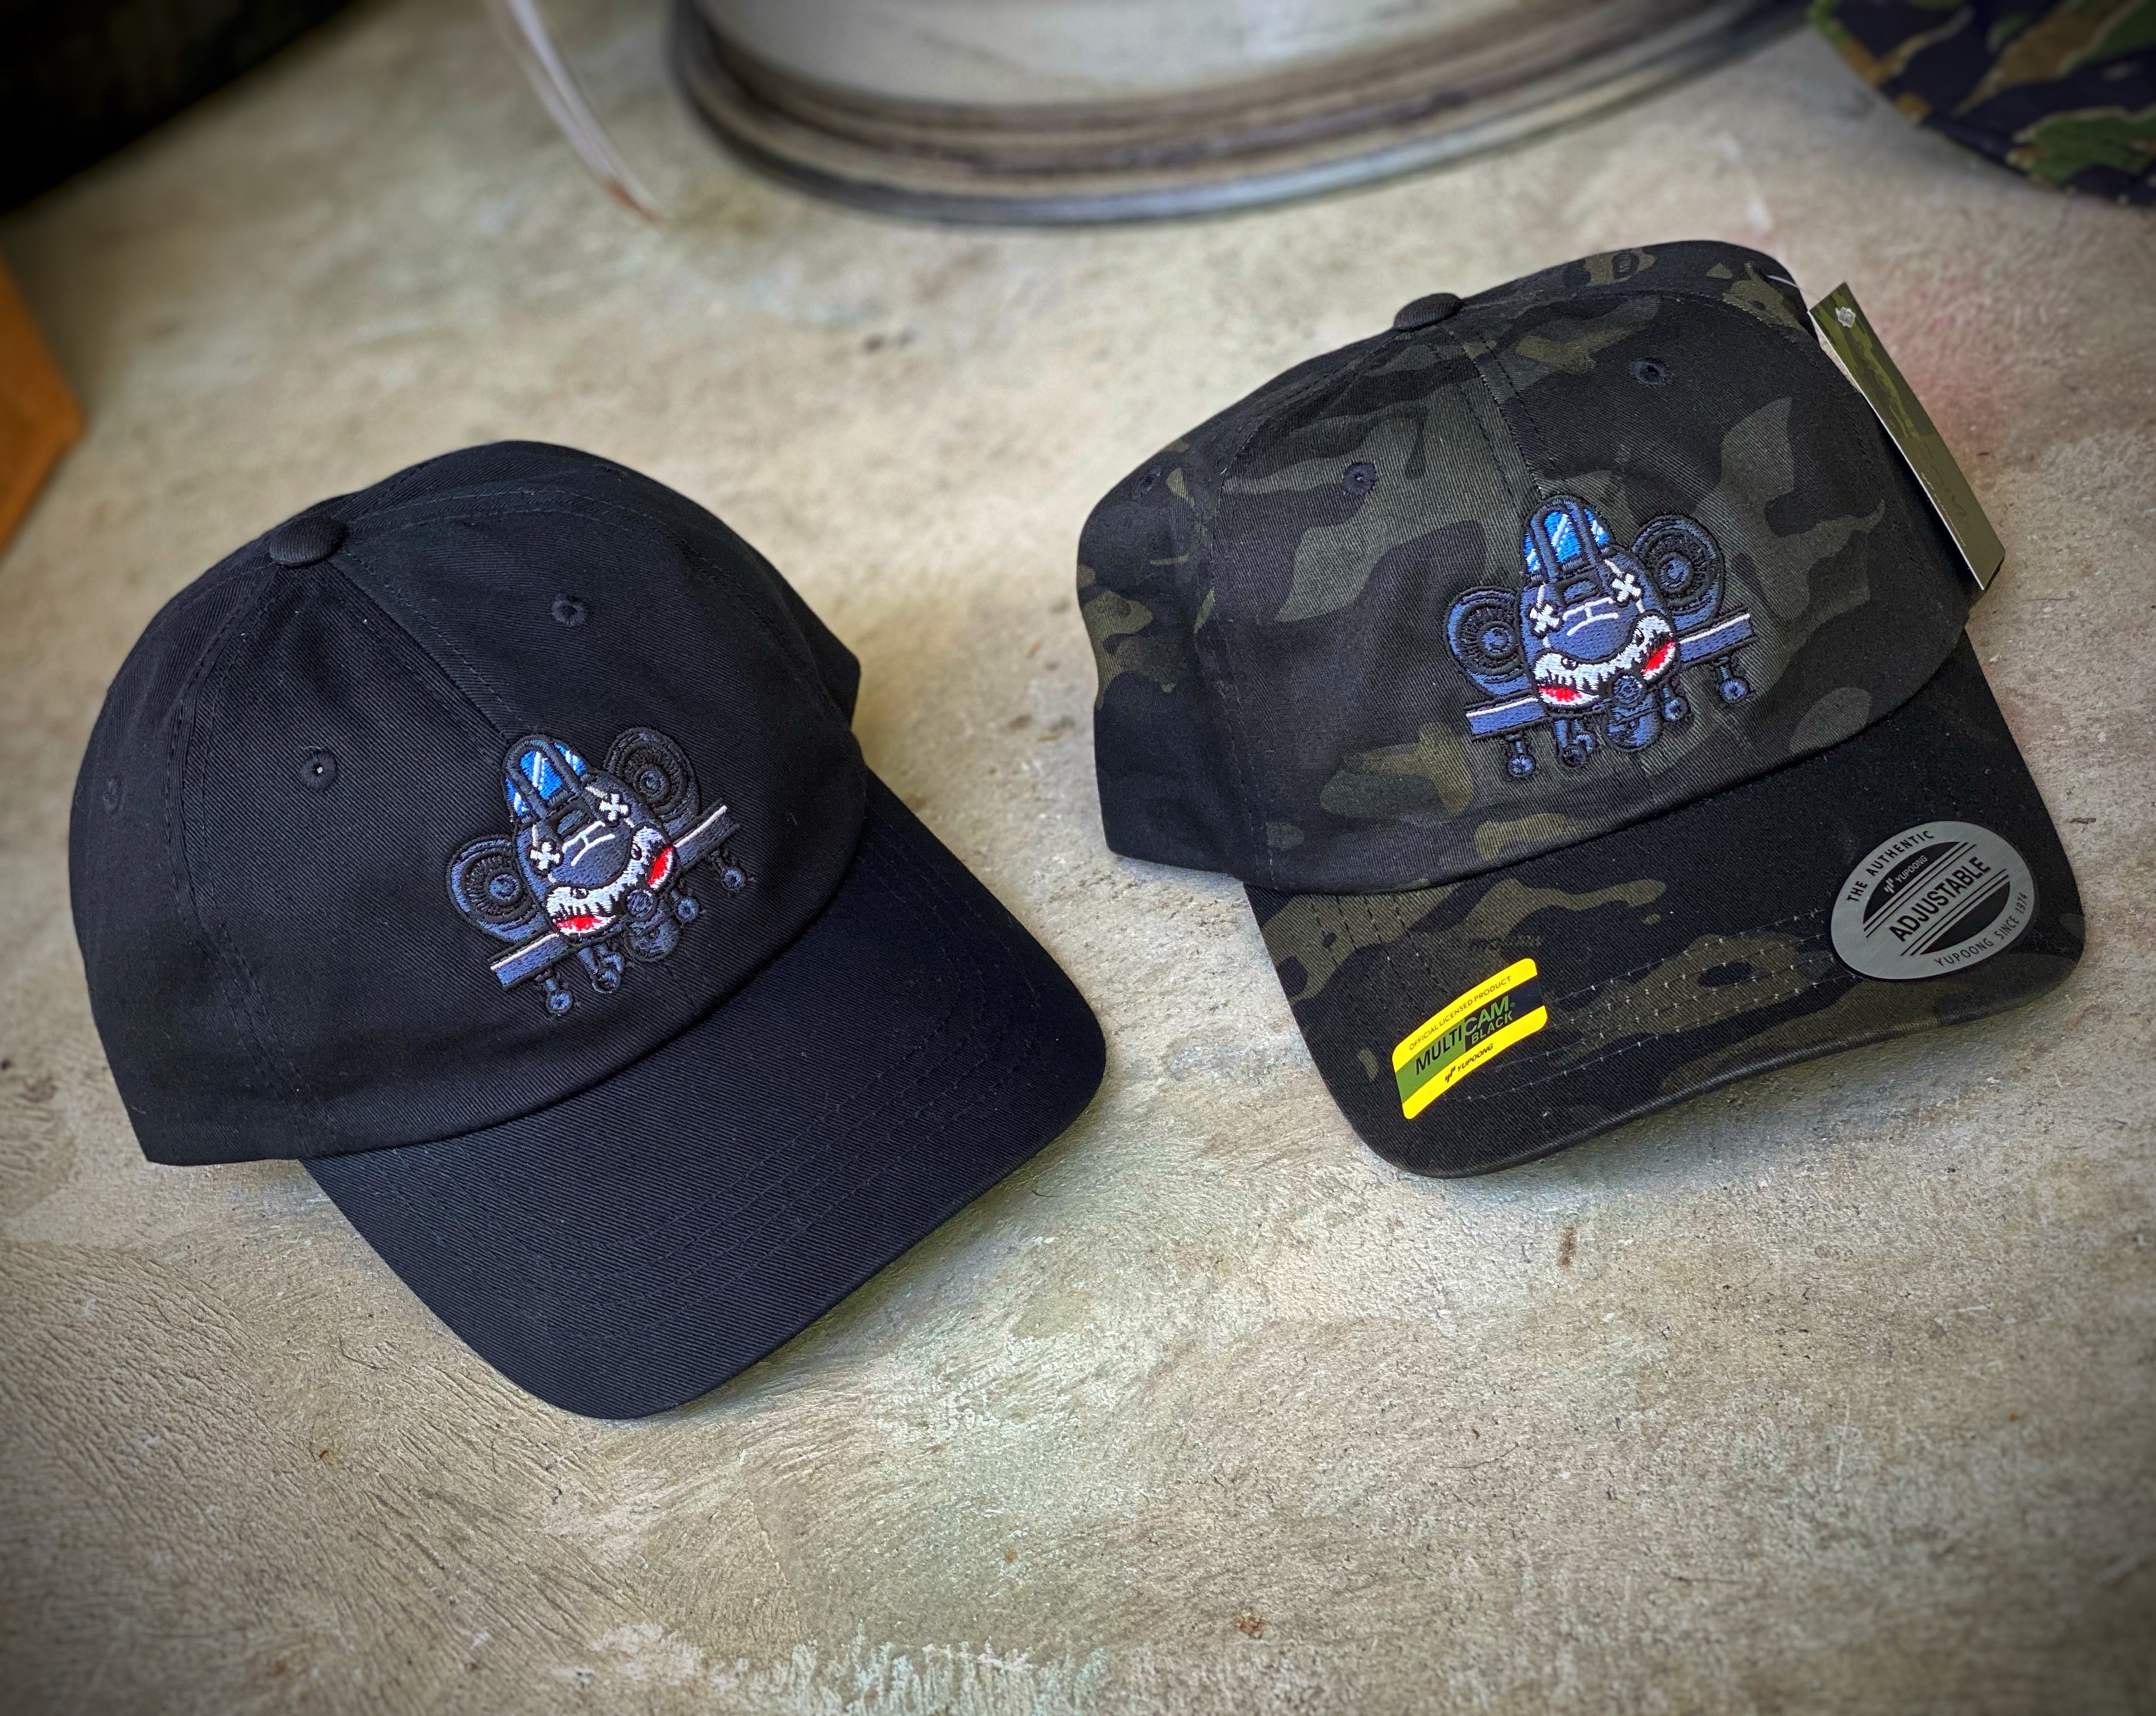 One black hat and one Multicam black camo hat both featuring the dangerous goods brand A10 warthog logo embroidered in the center